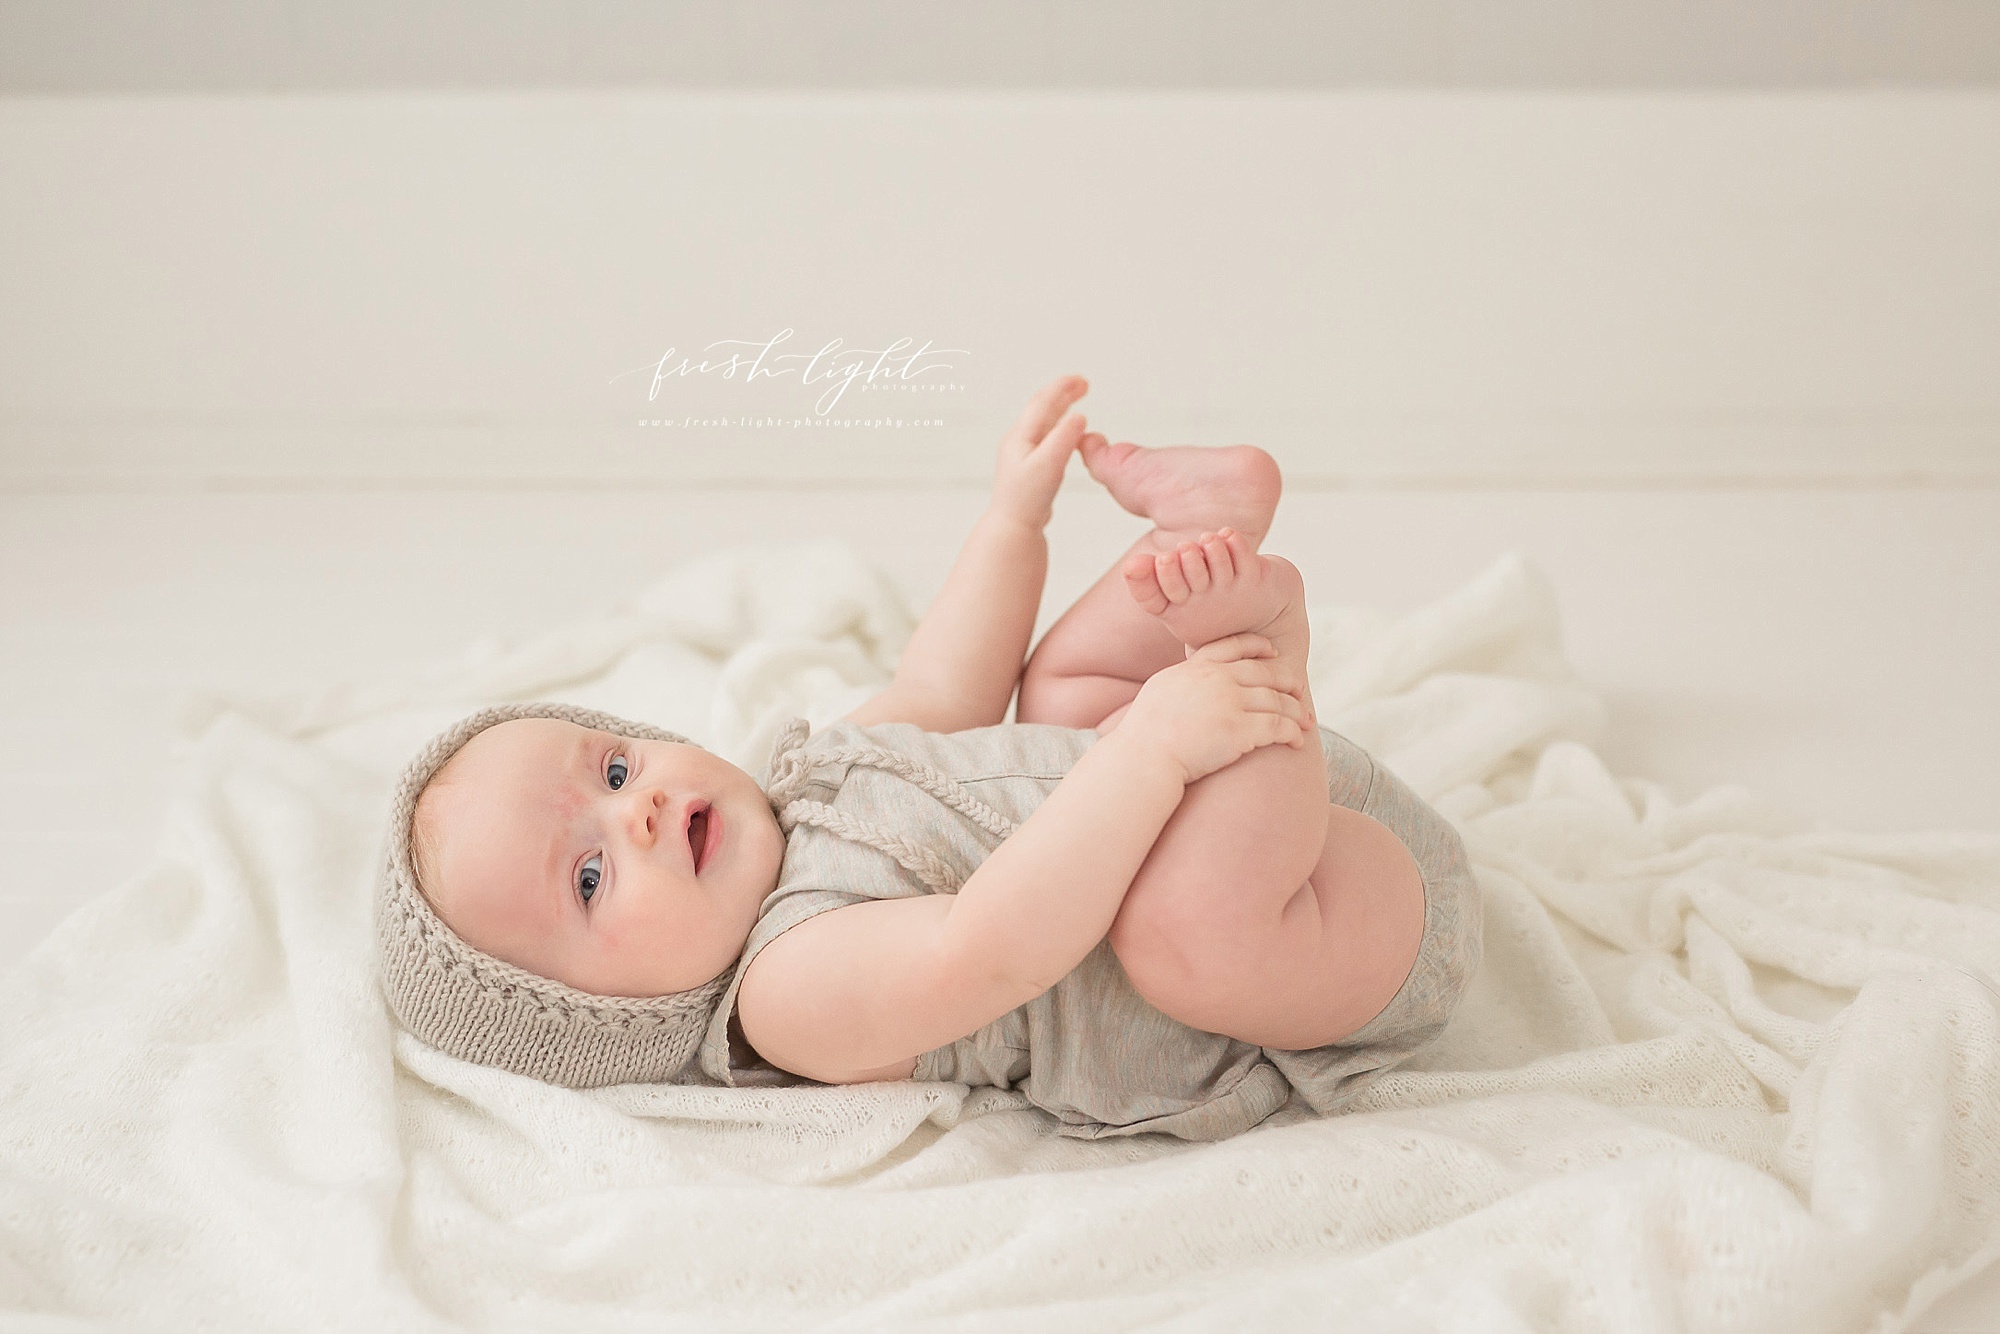 4 month old baby grabbing her toes